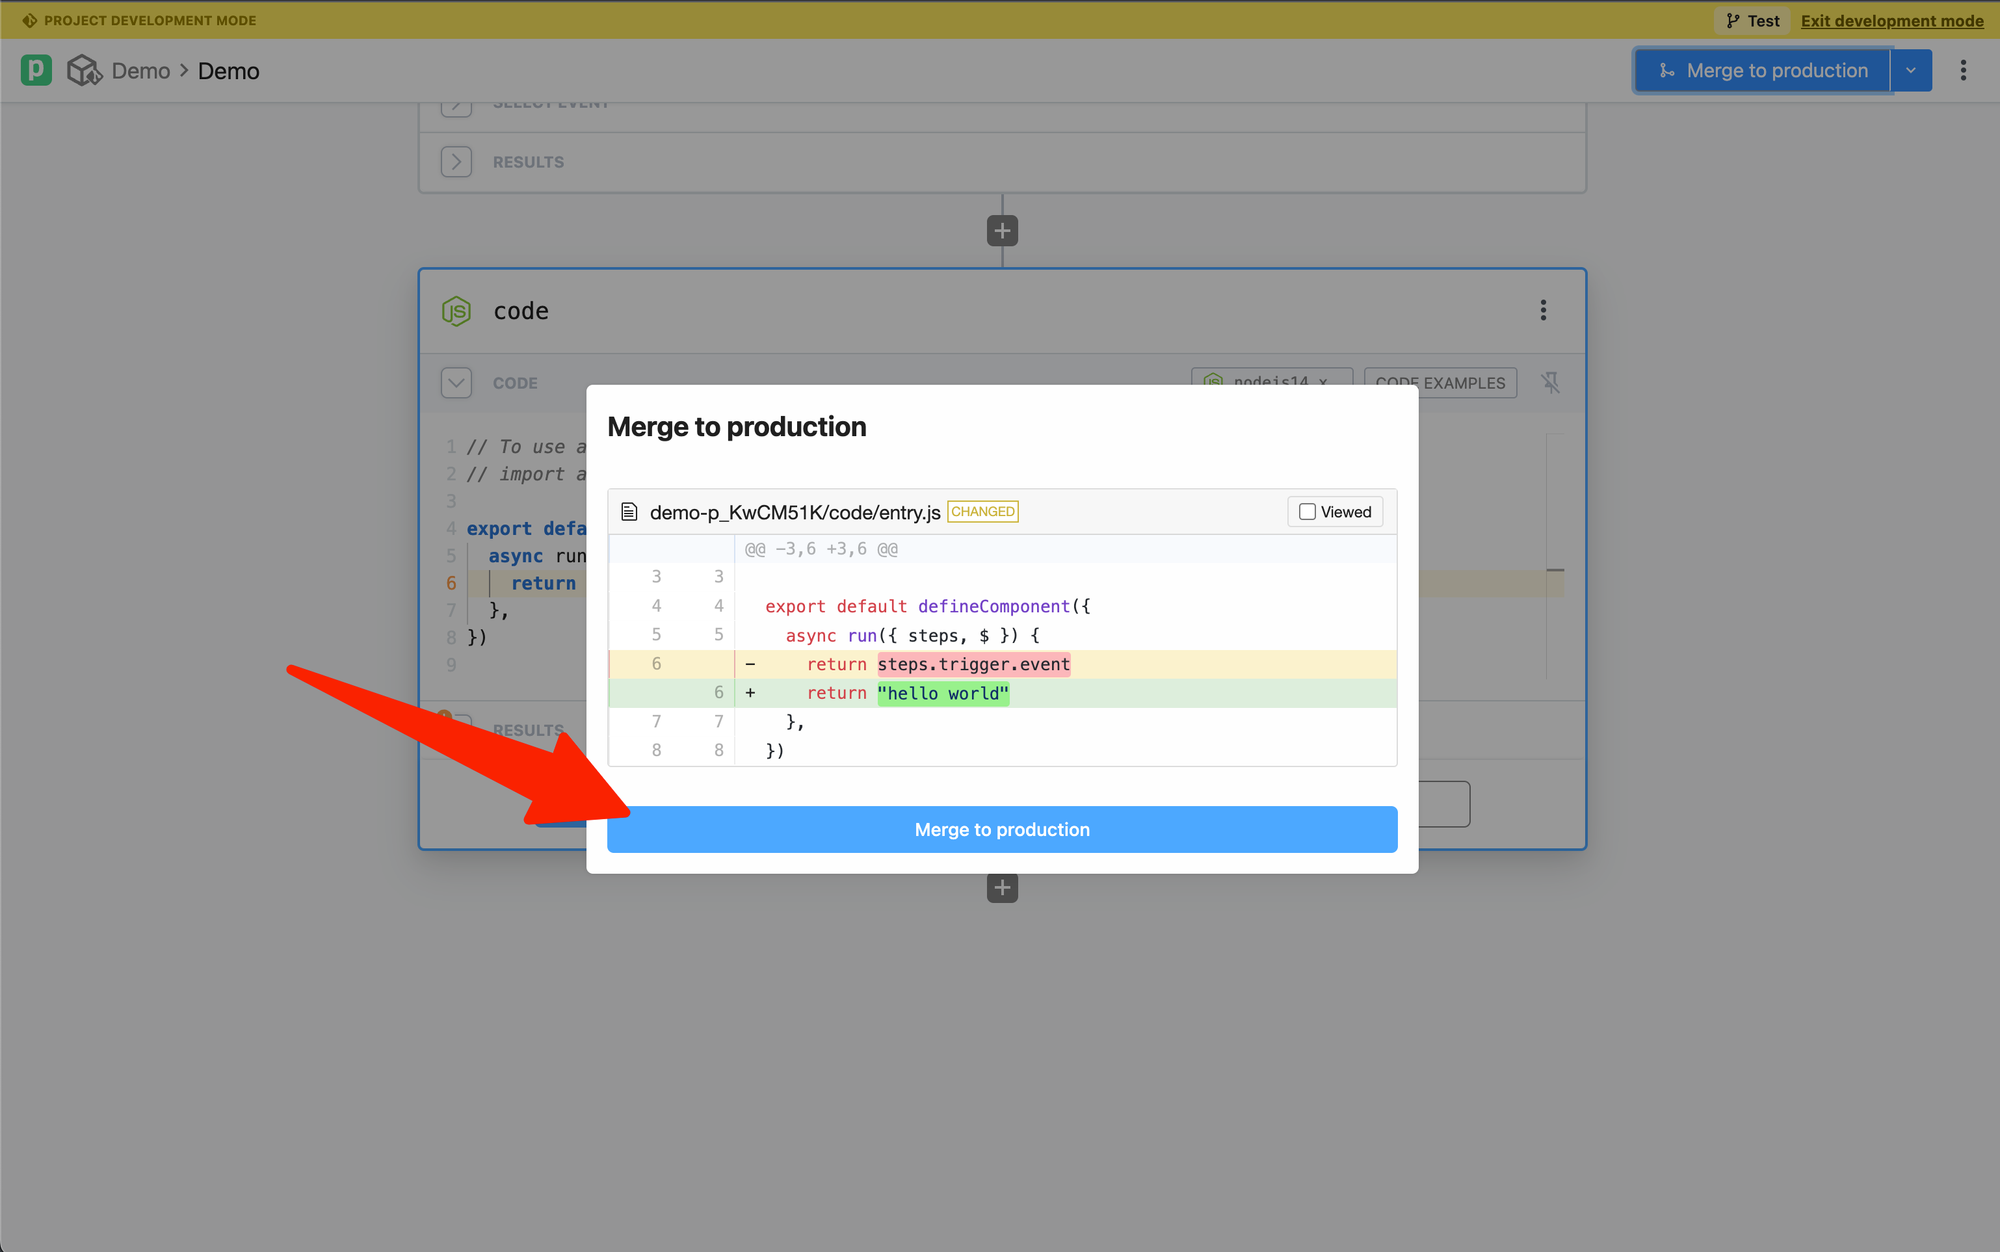 In the confirmation modal, click Merge to production to confirm the changes